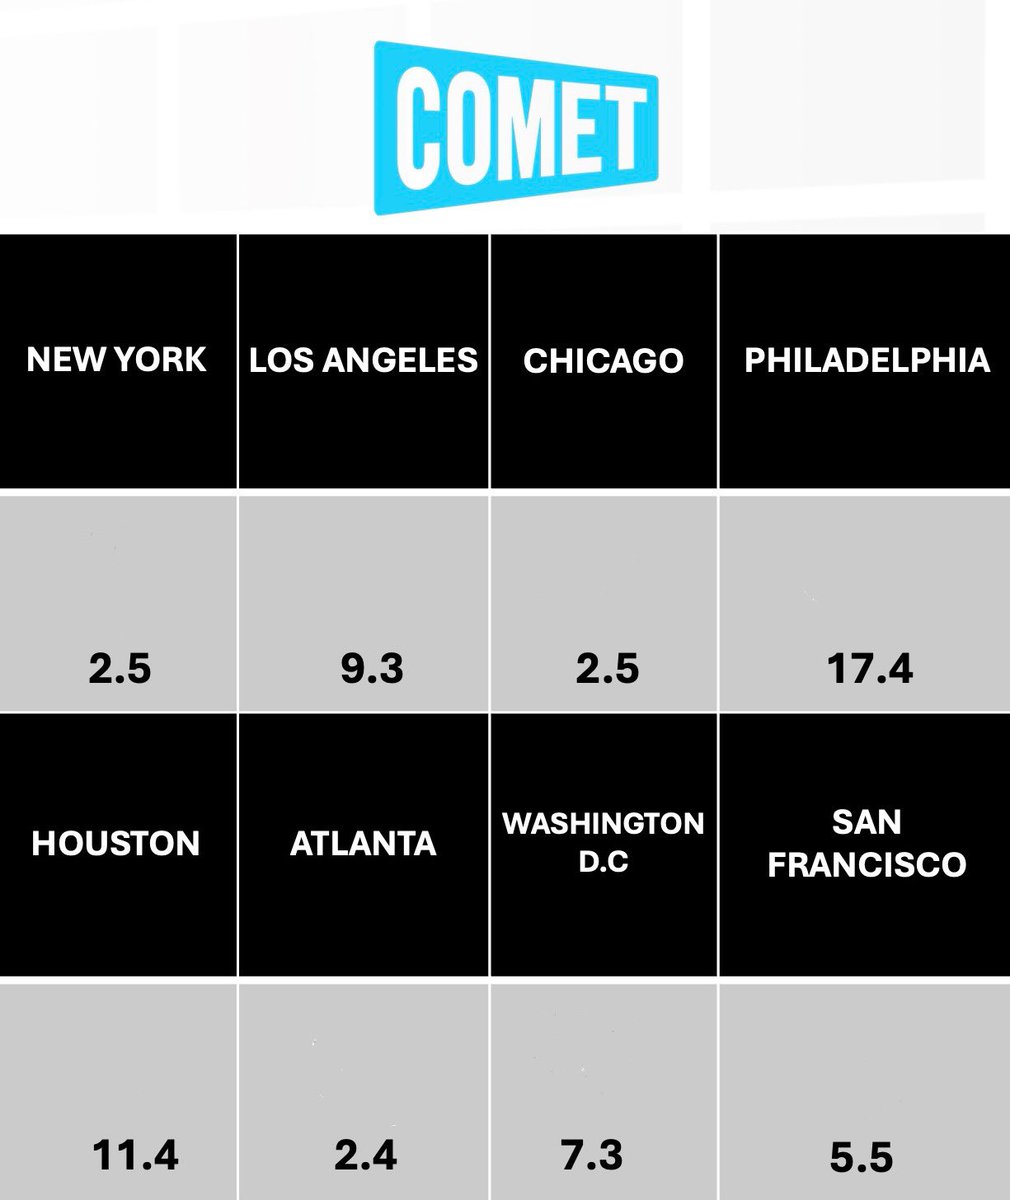 Discover the latest station listings for COMET in major cities nationwide! #COMETTV